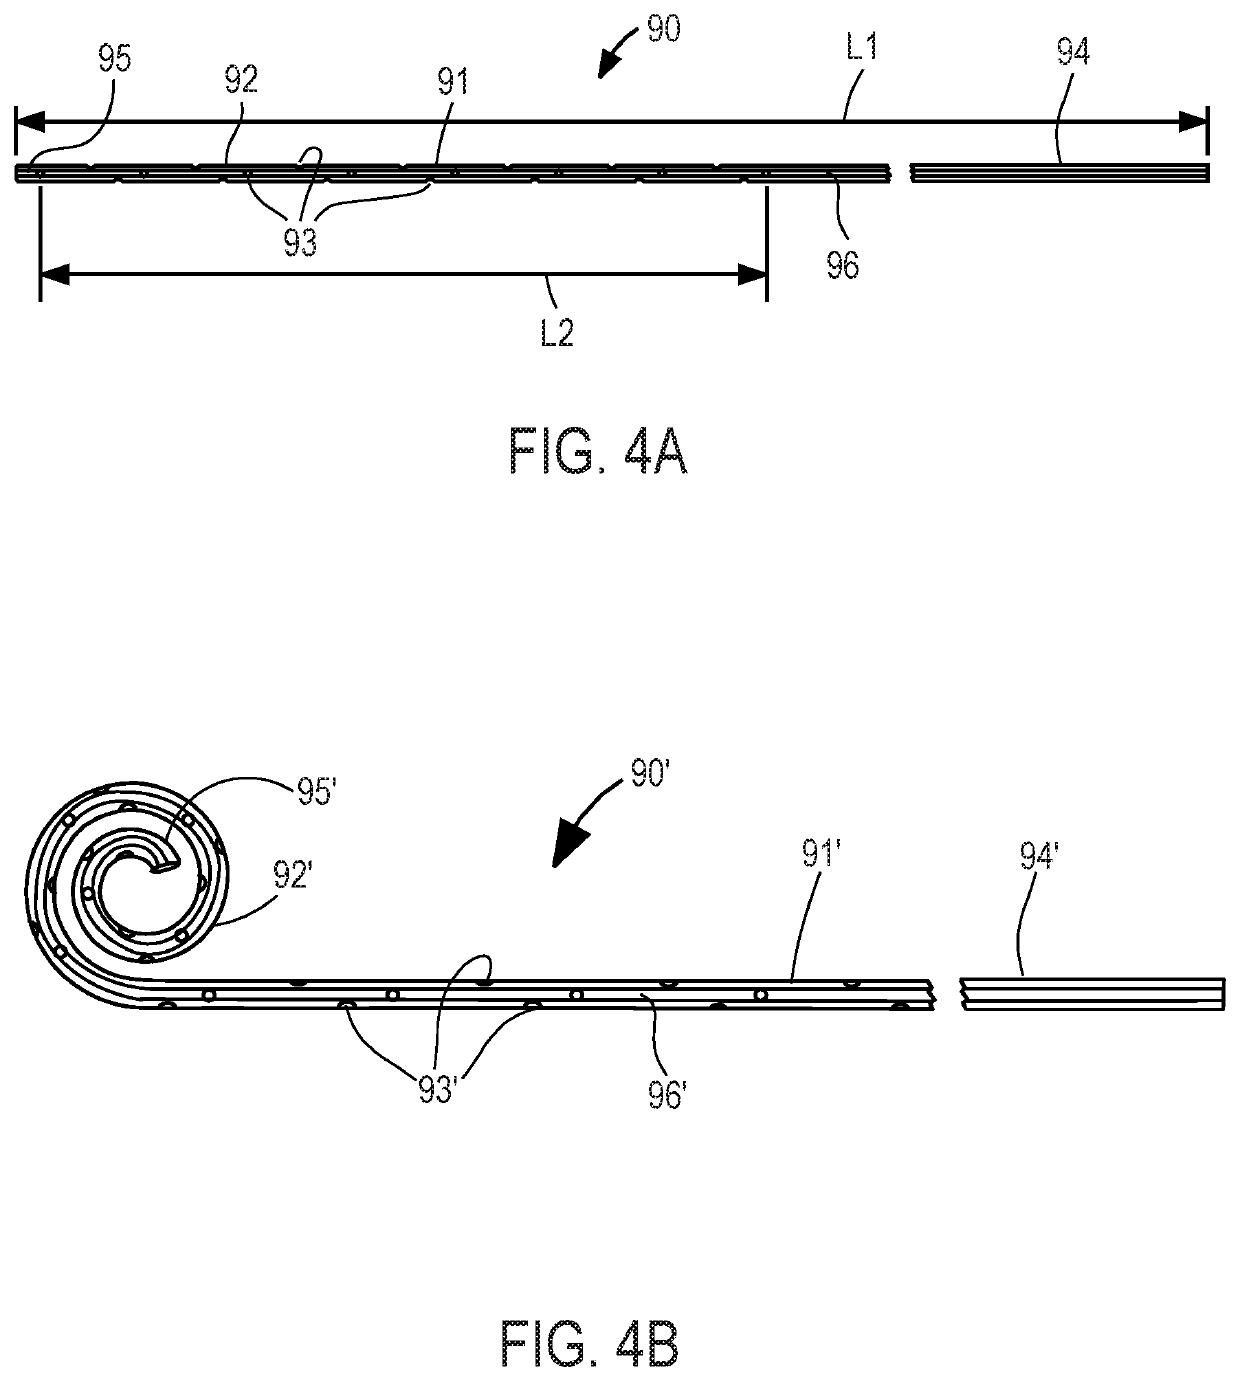 Implantable fluid management system having clog resistant catheters, and methods of using same